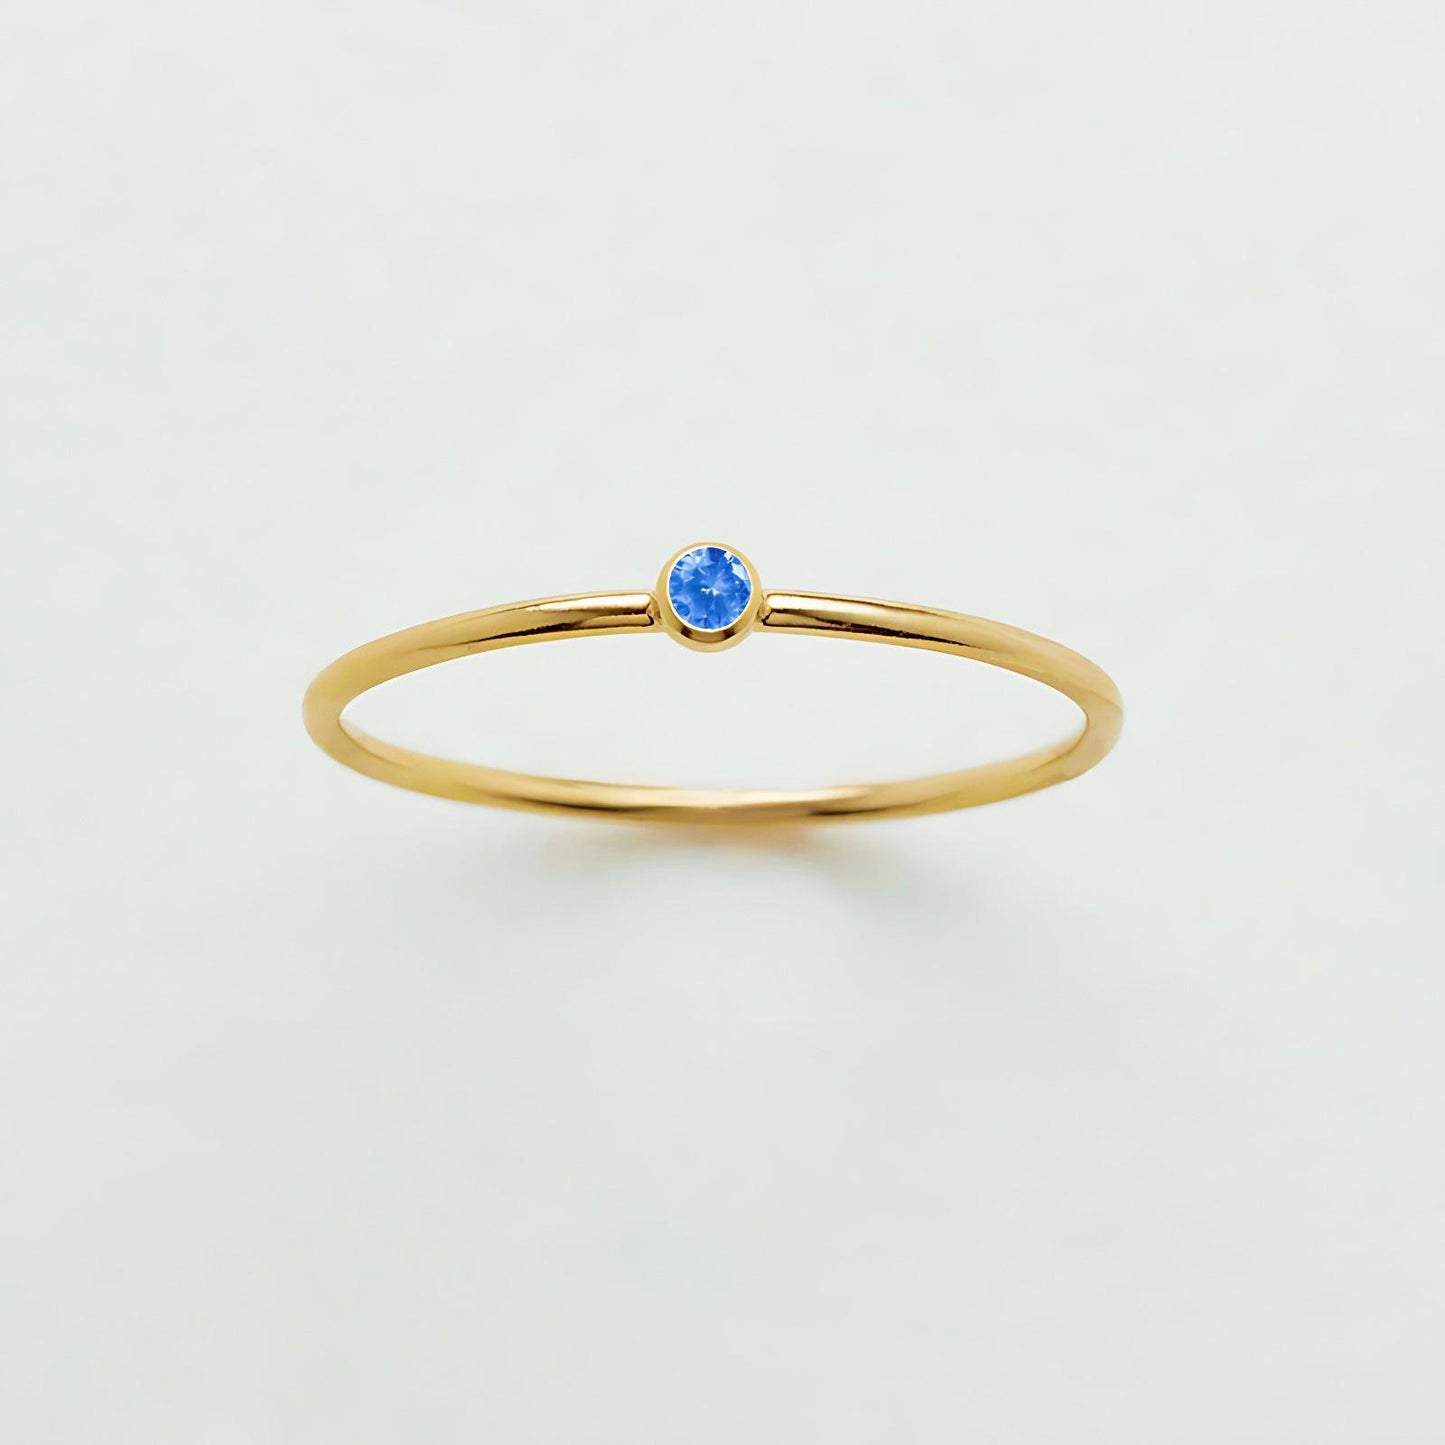 March Birthstone Cute Ring for Christmas 2023 | March Birthstone Cute Ring - undefined | Birthstone Ring, cute ring, March Birthstone, March birthstone is Aquamarine, S925 Silver Vintage Cute Ring, Sterling Silver s925 cute Ring | From Hunny Life | hunnylife.com